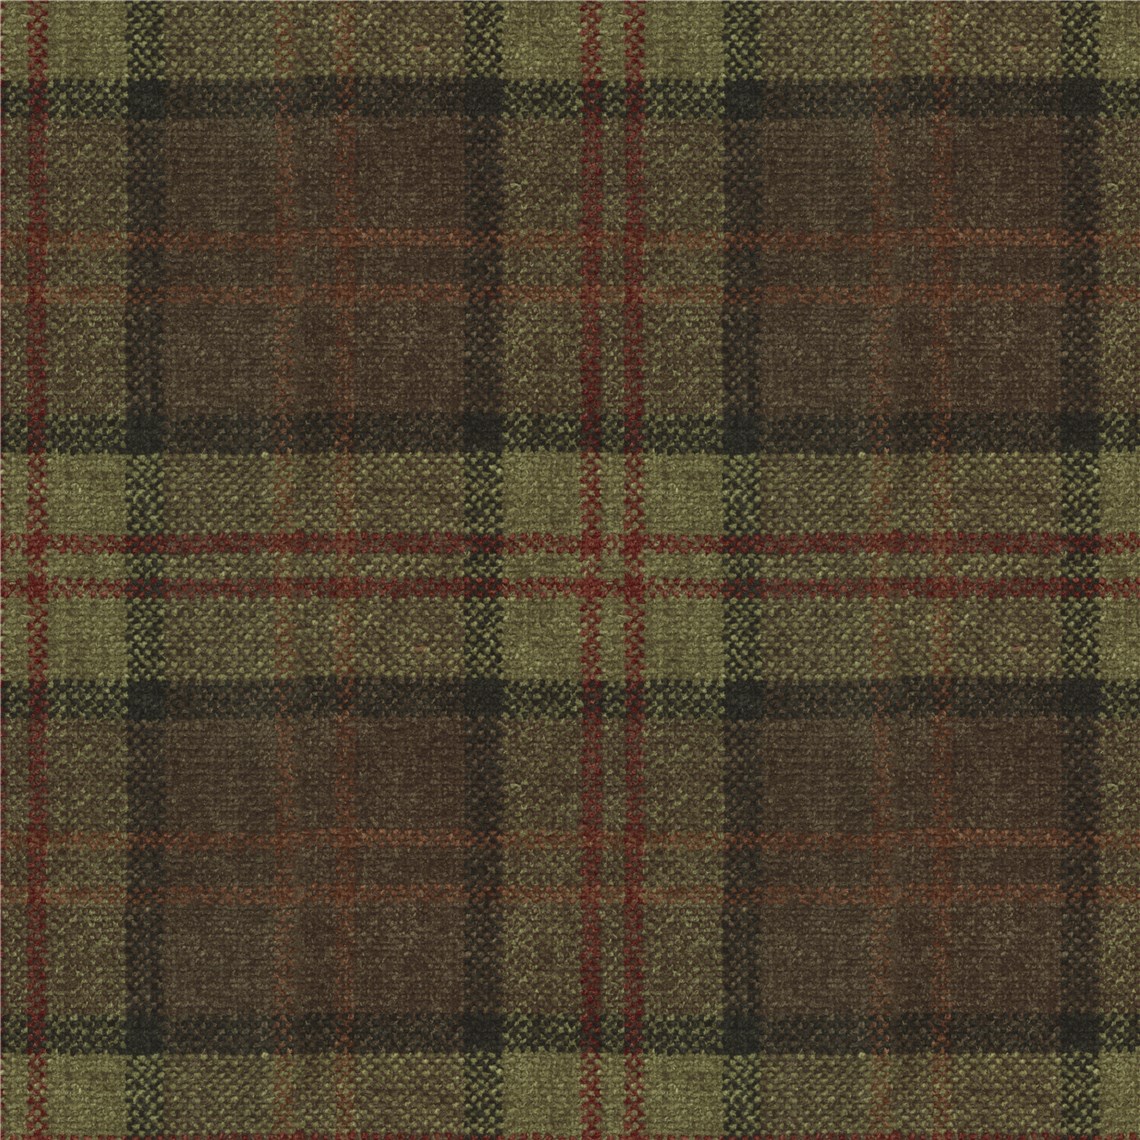 Plaid_All_Over_Dundee